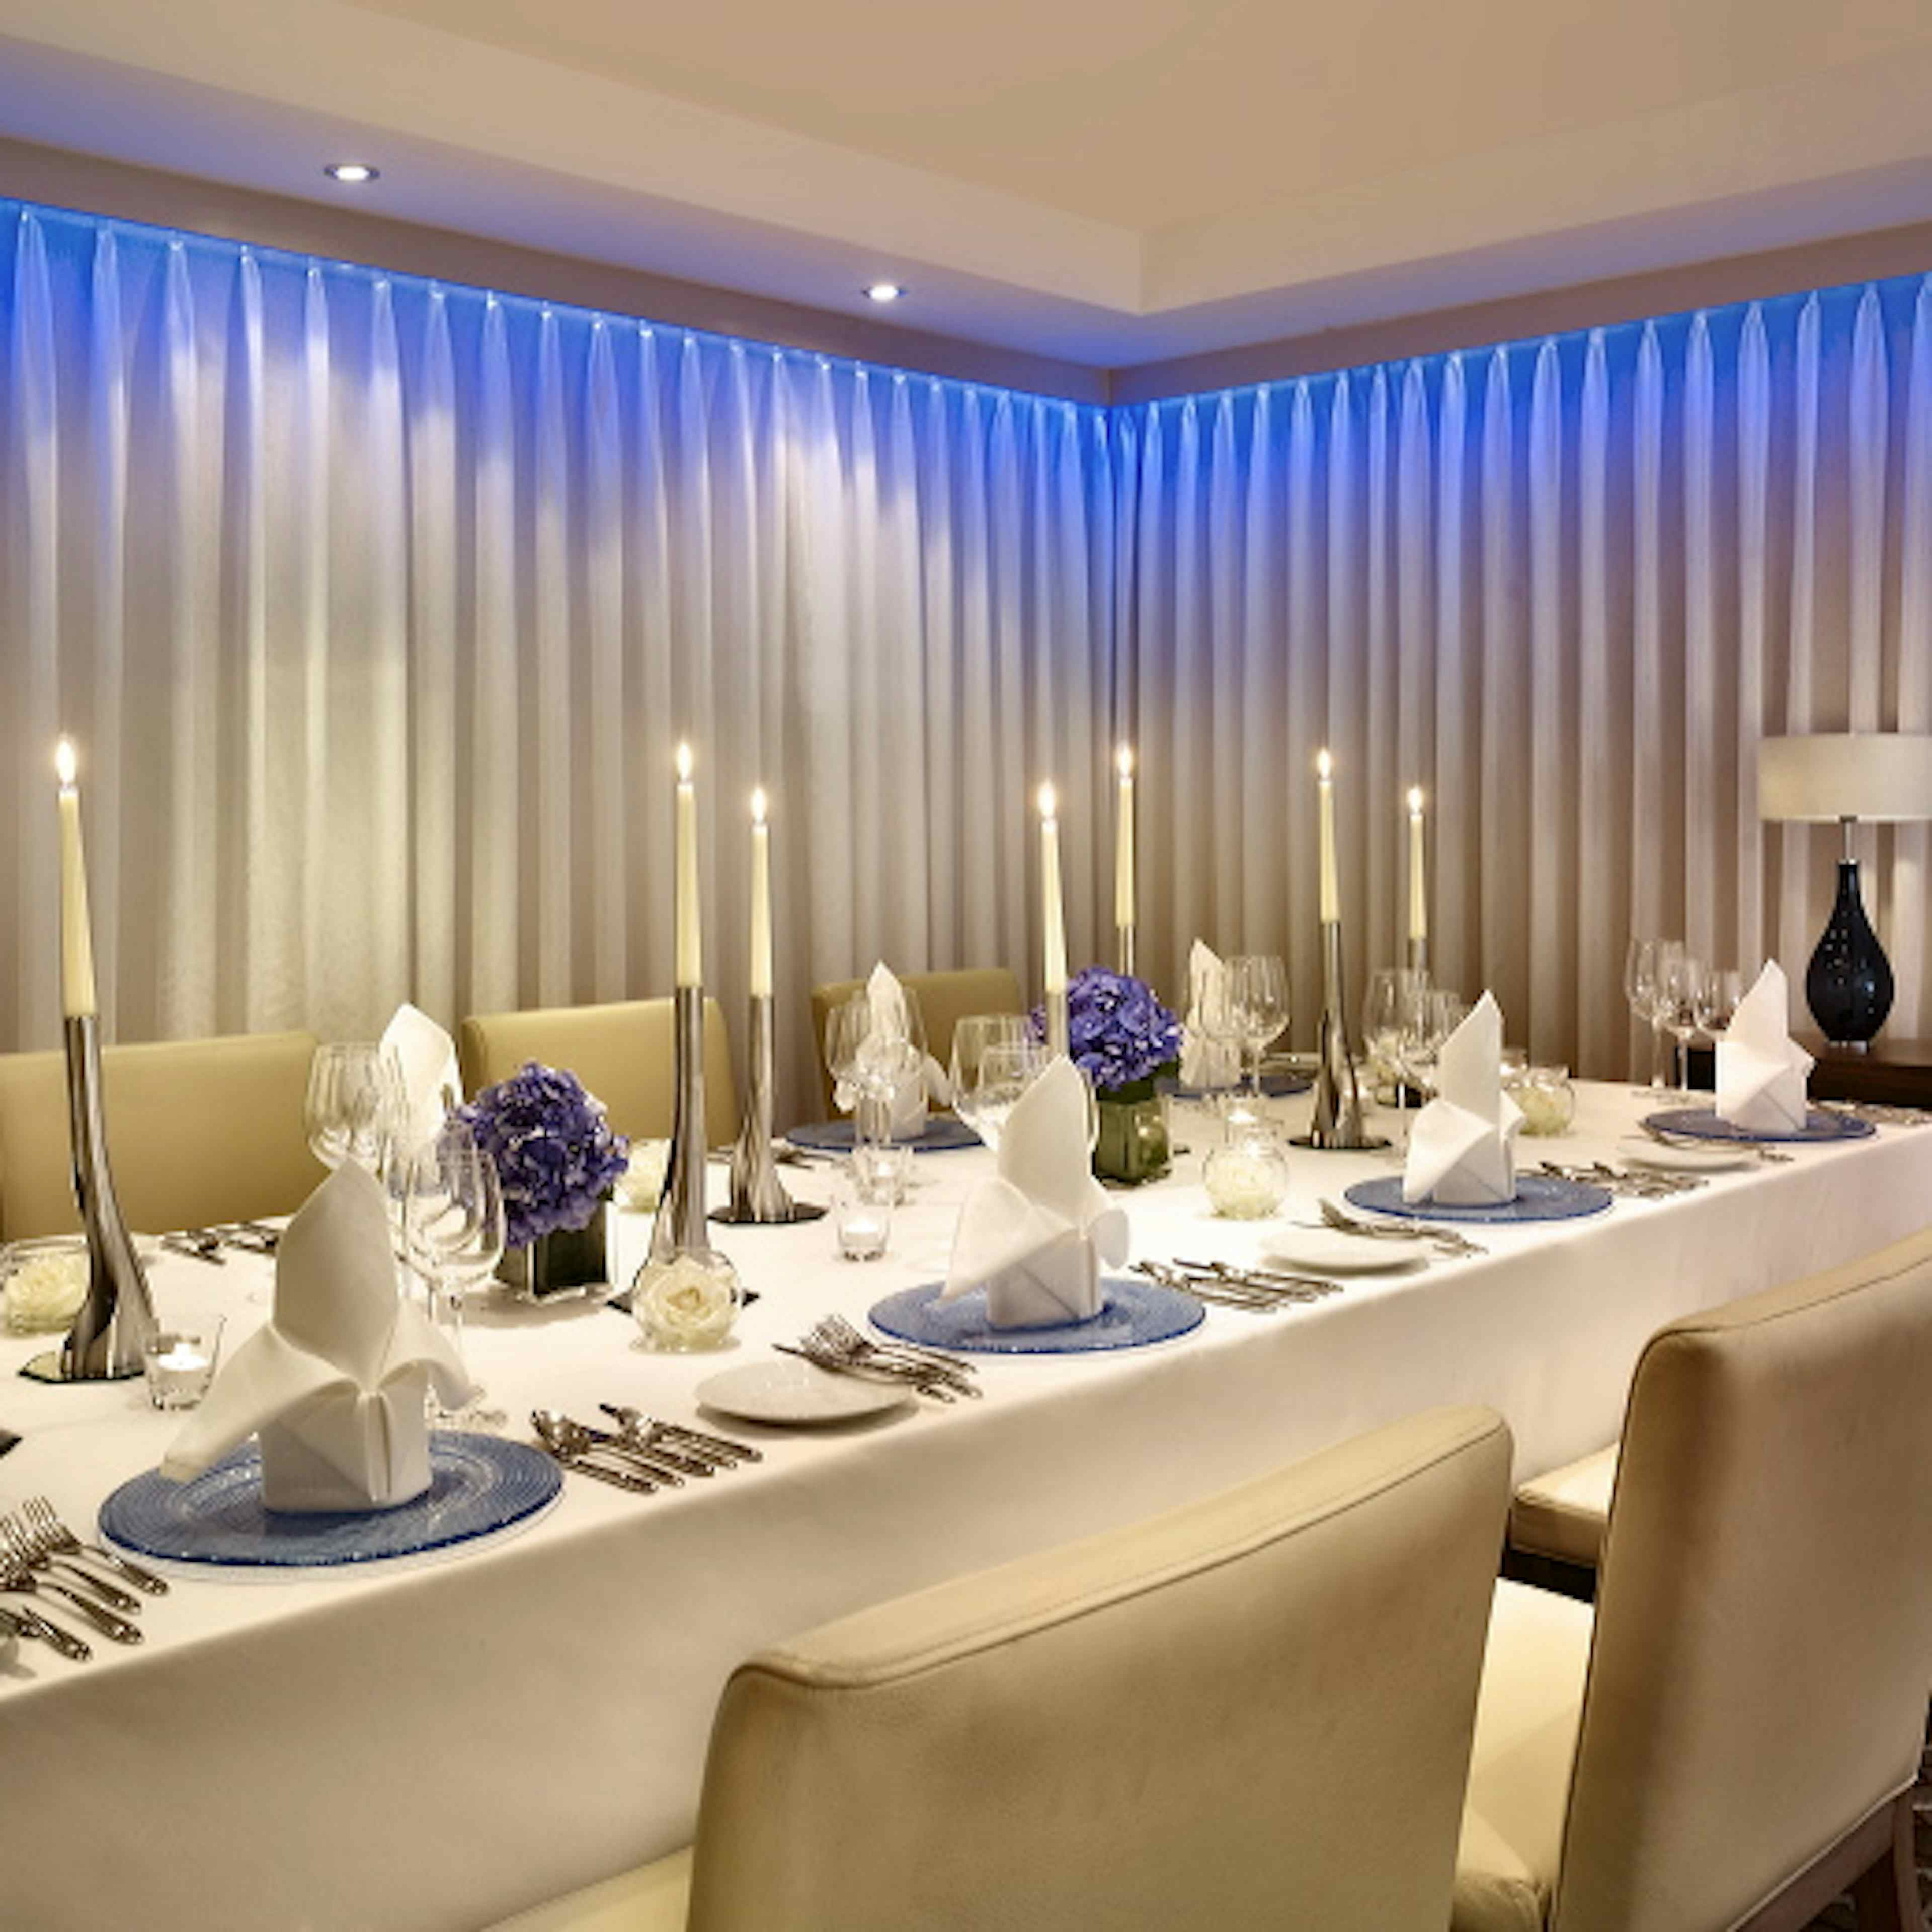 The Chelsea Harbour Hotel - Private Dining Room image 3